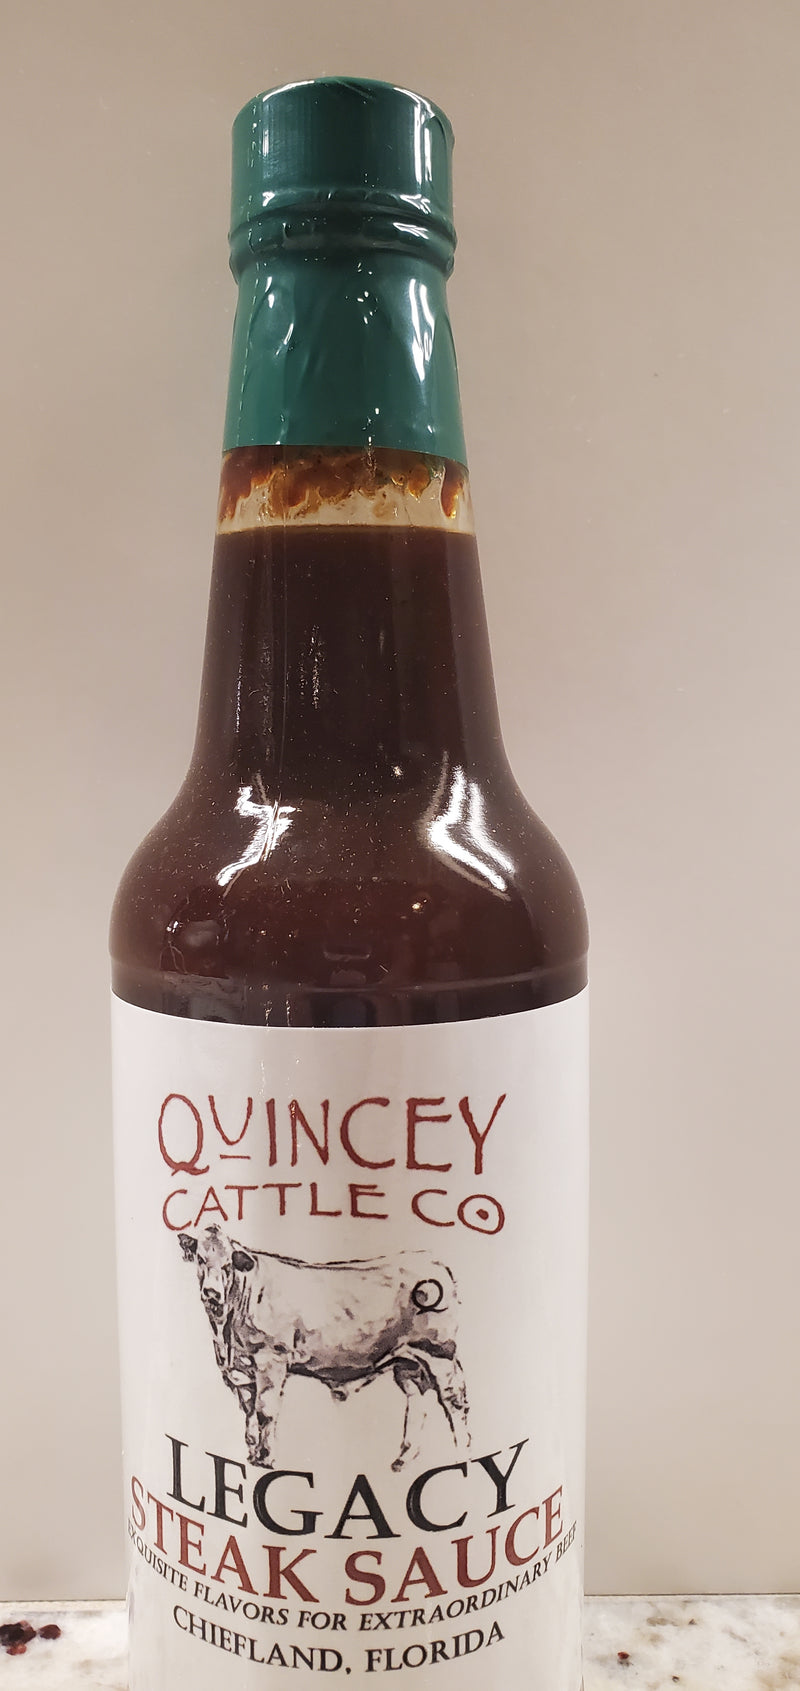 Quincey Cattle Company Legacy Steak Sauce